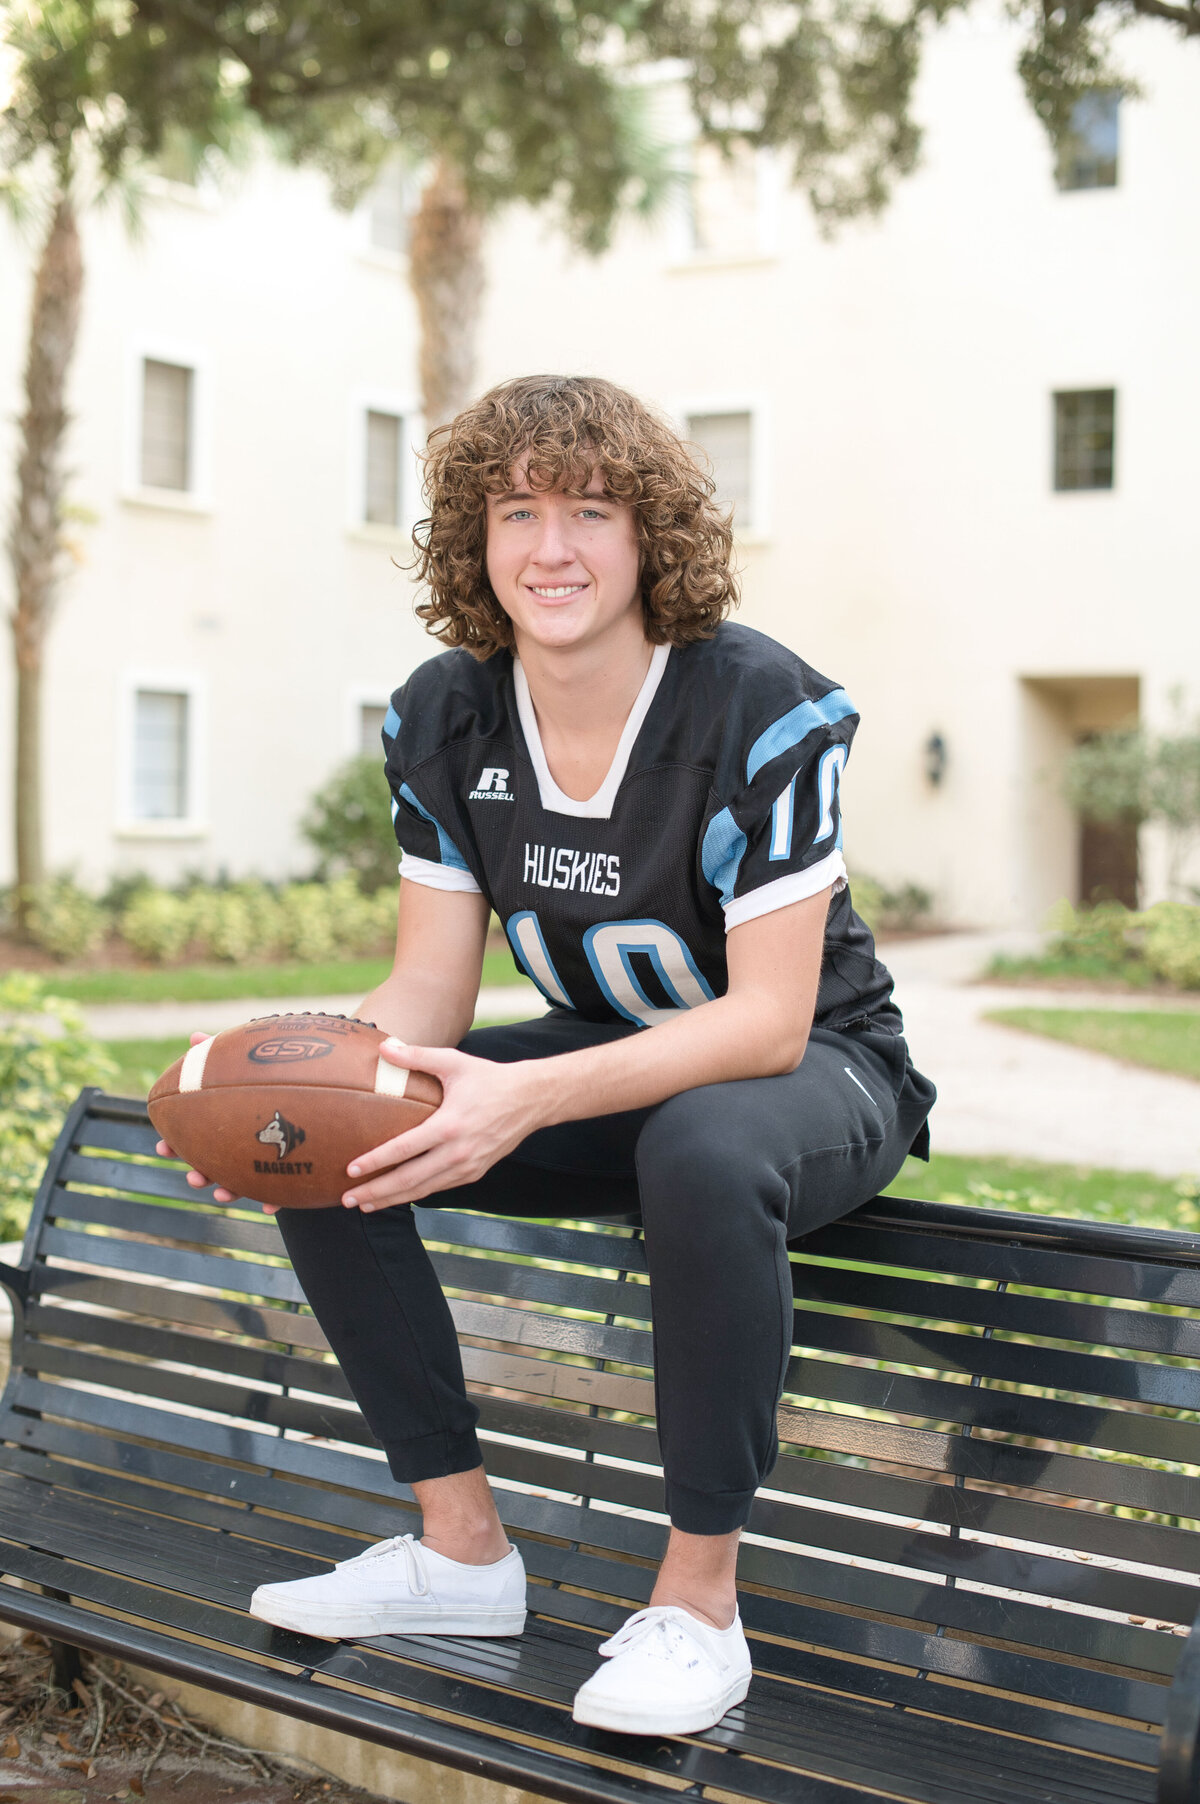 Hagerty High School senior boy in football jersey holding a football sitting on top of a bench smiling.